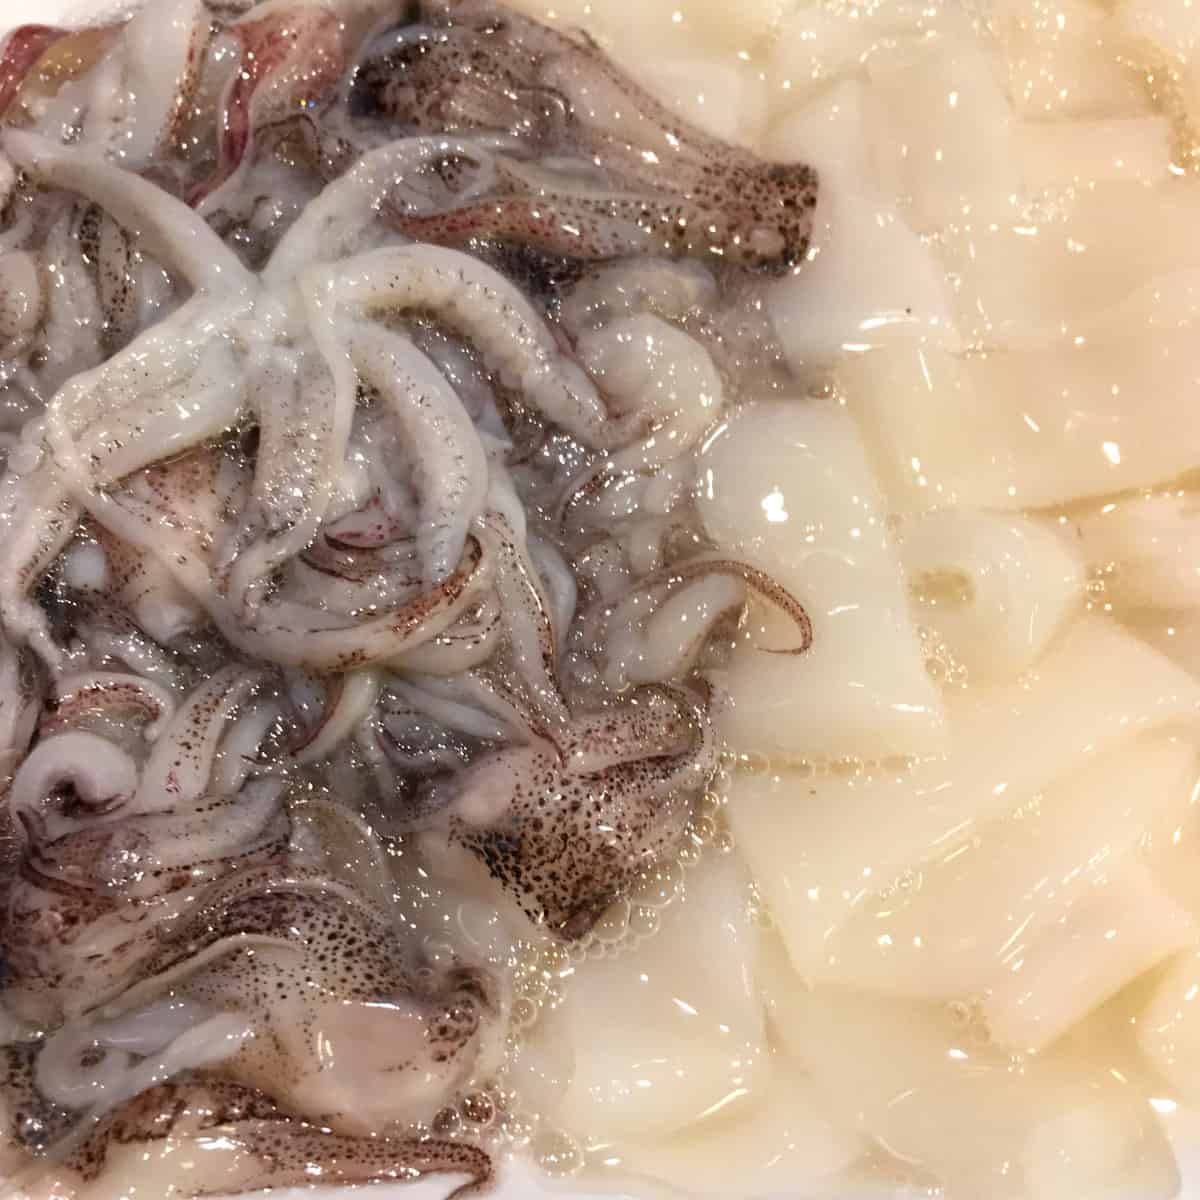 raw squid rings and tentacles